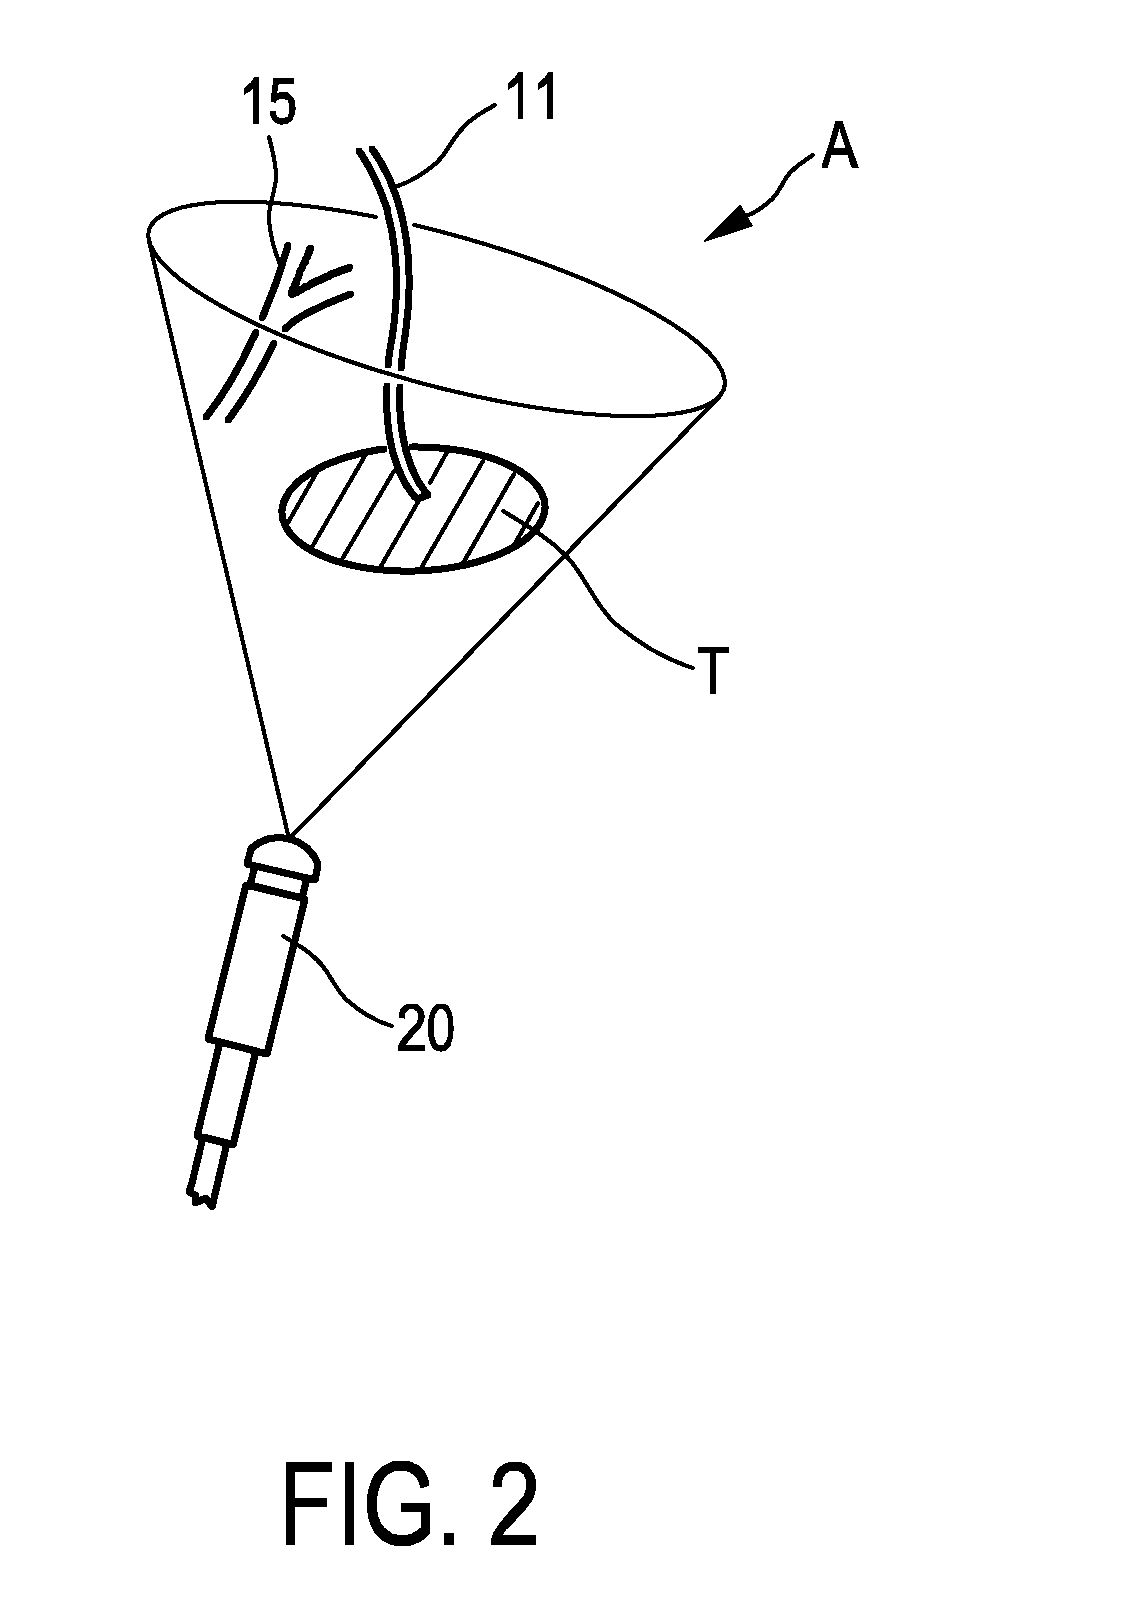 Ultrasound imaging system and method for image guidance procedure